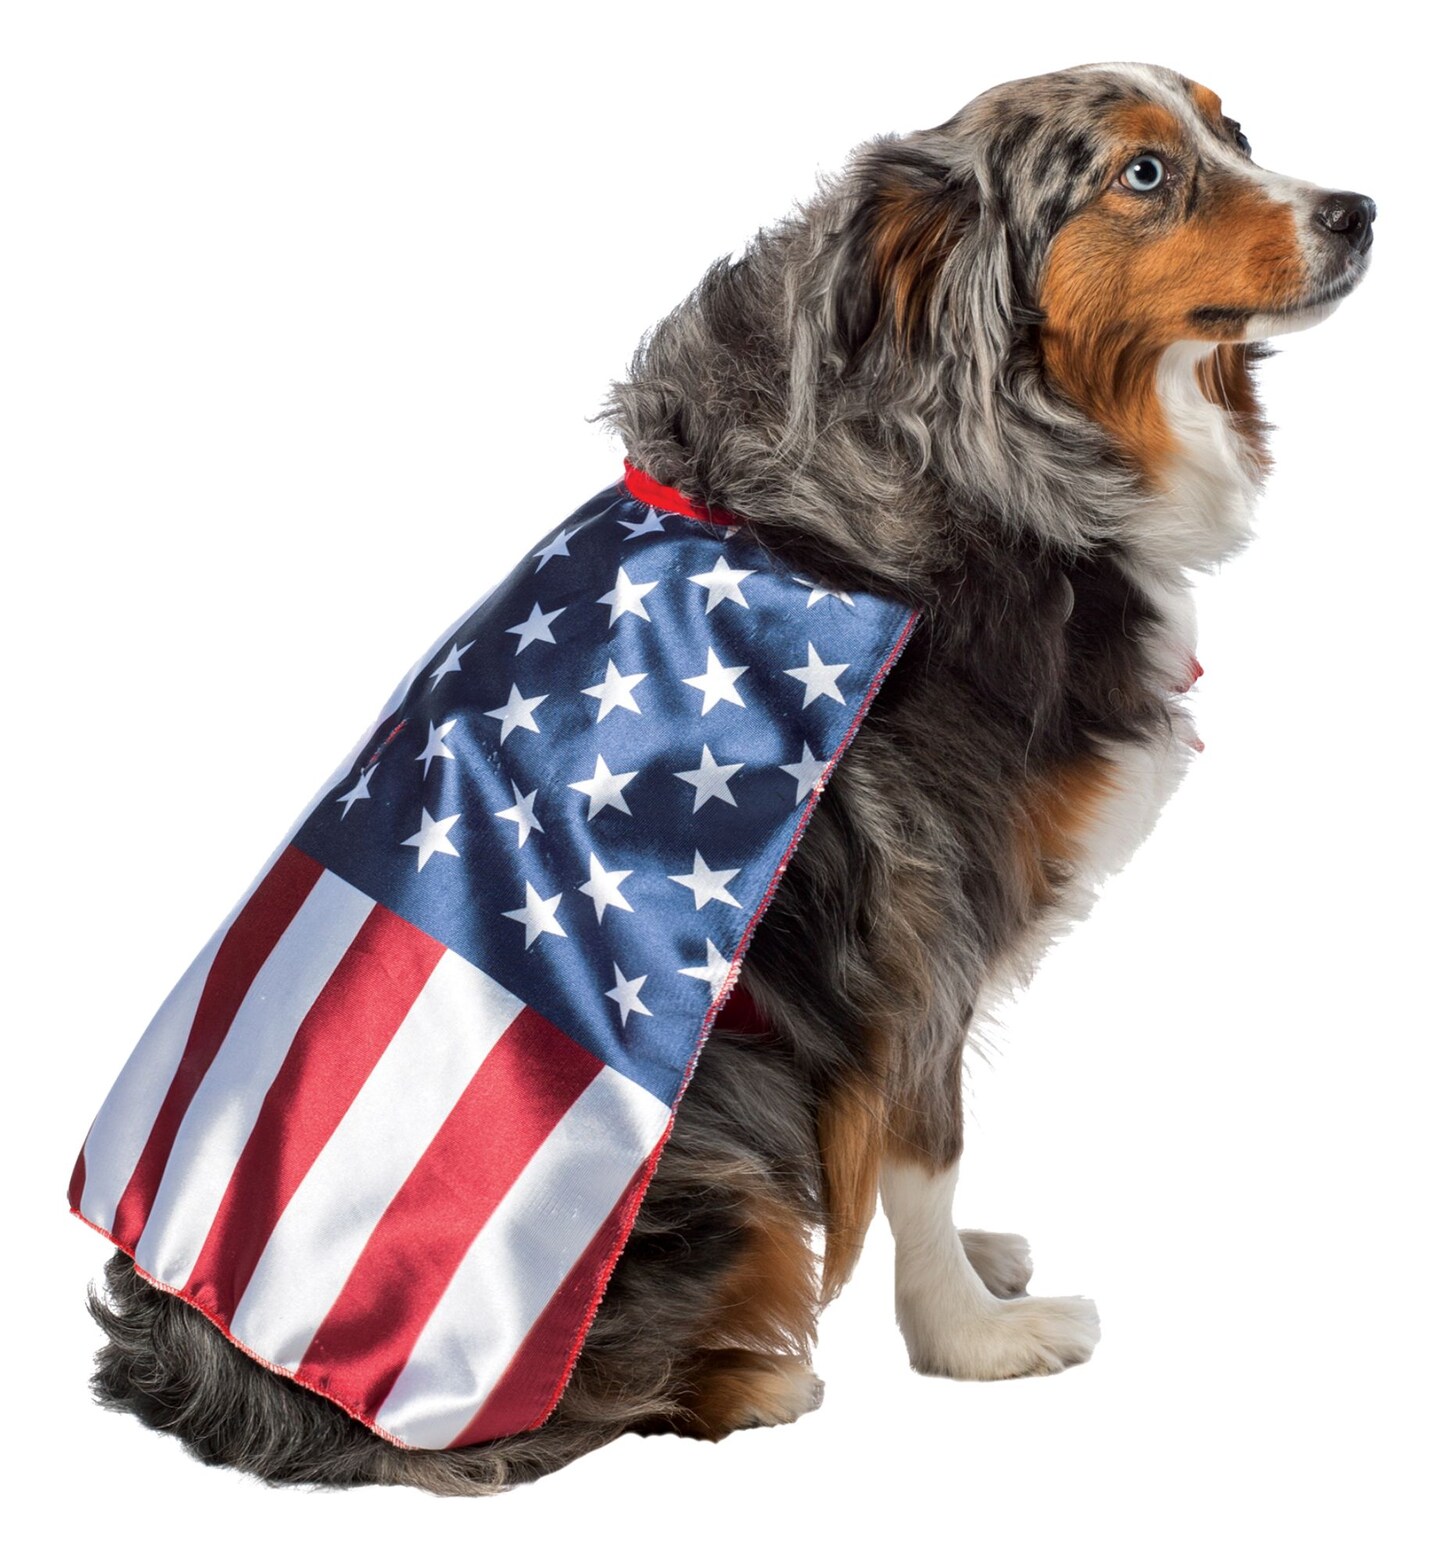 The Costume Center Blue and Red Patriotic Flag Cape Halloween Pet Costume - Large